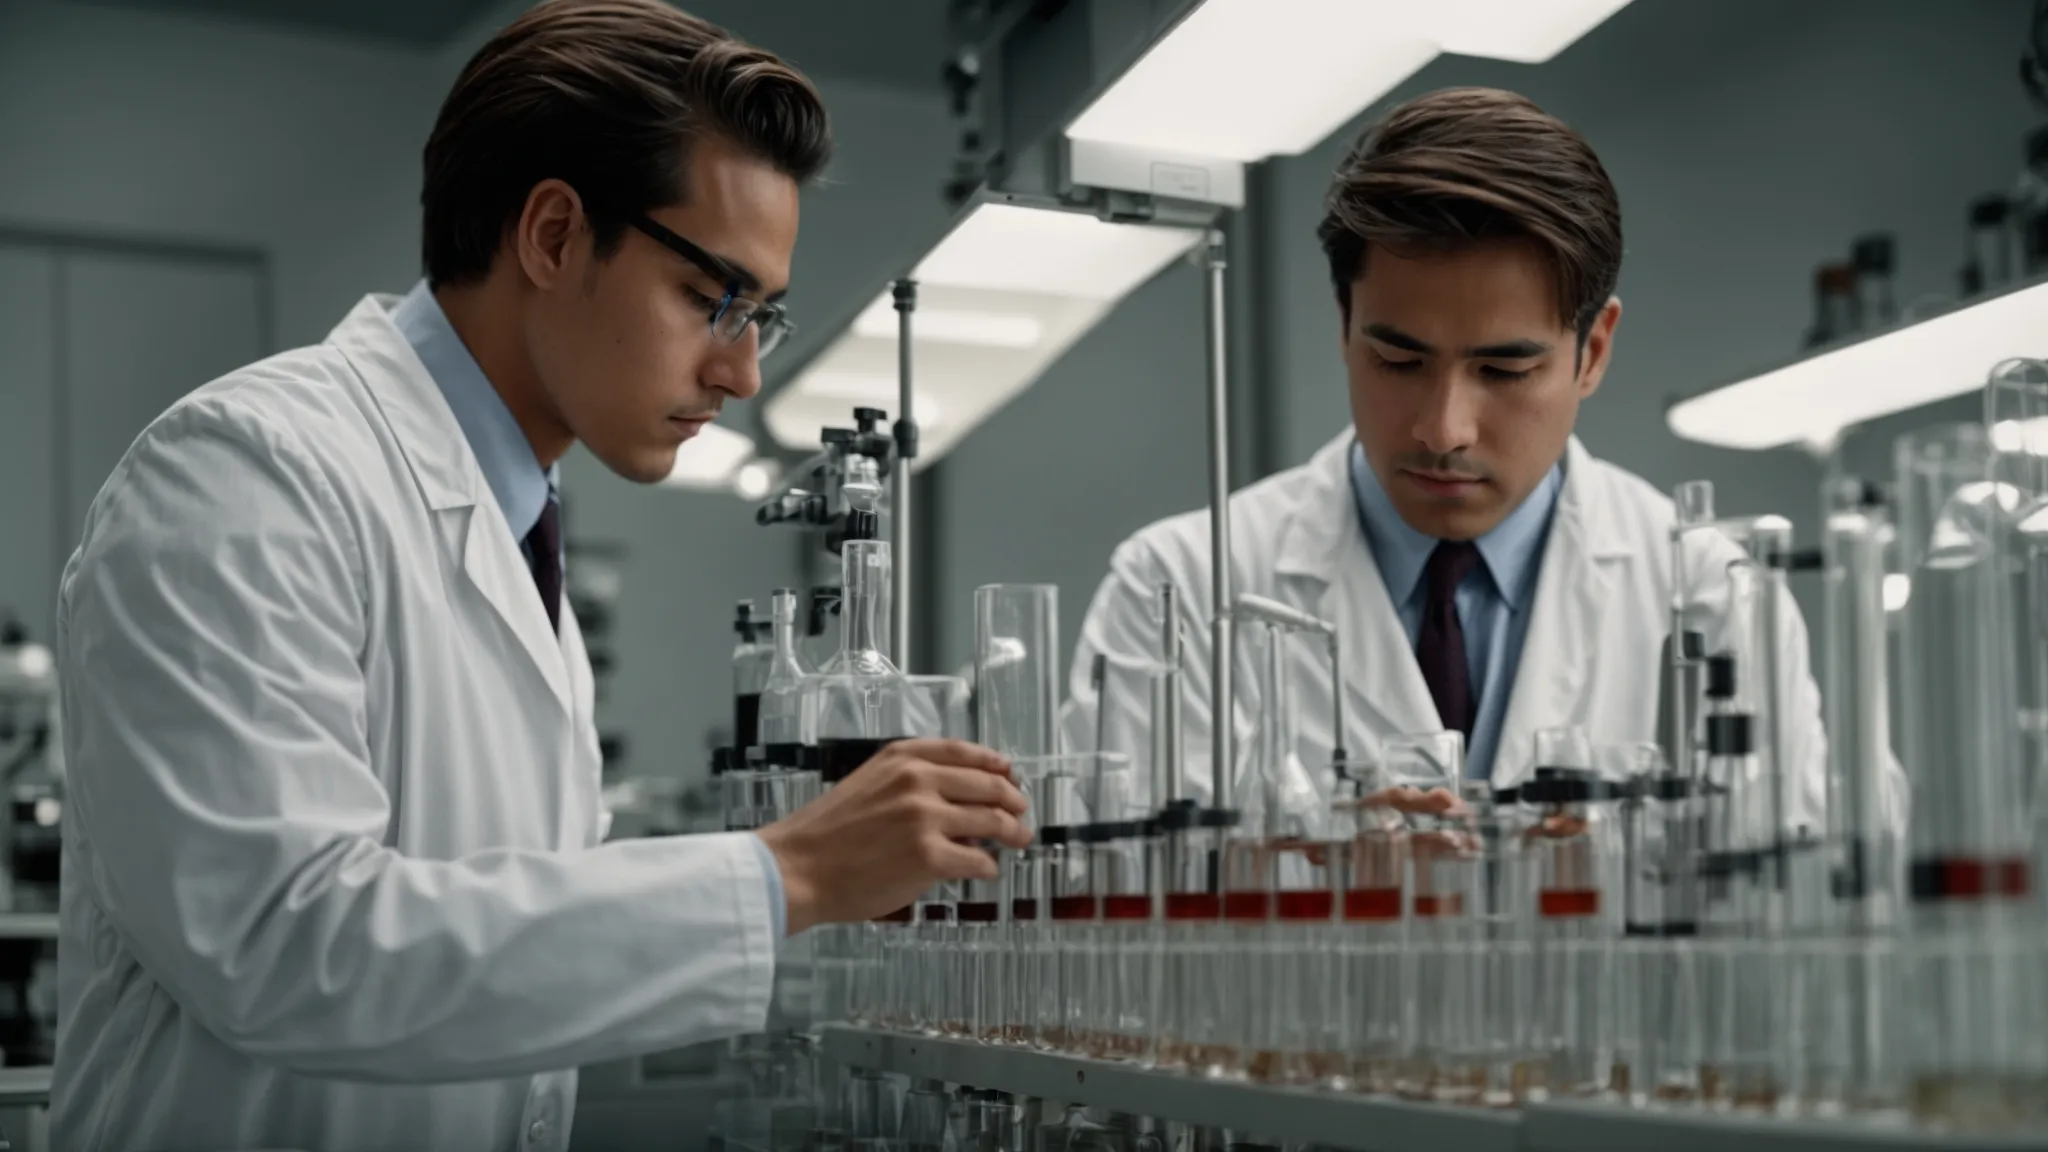 a scientist attentively adjusts settings on two nearly identical laboratory experiments, observing the reactions closely.